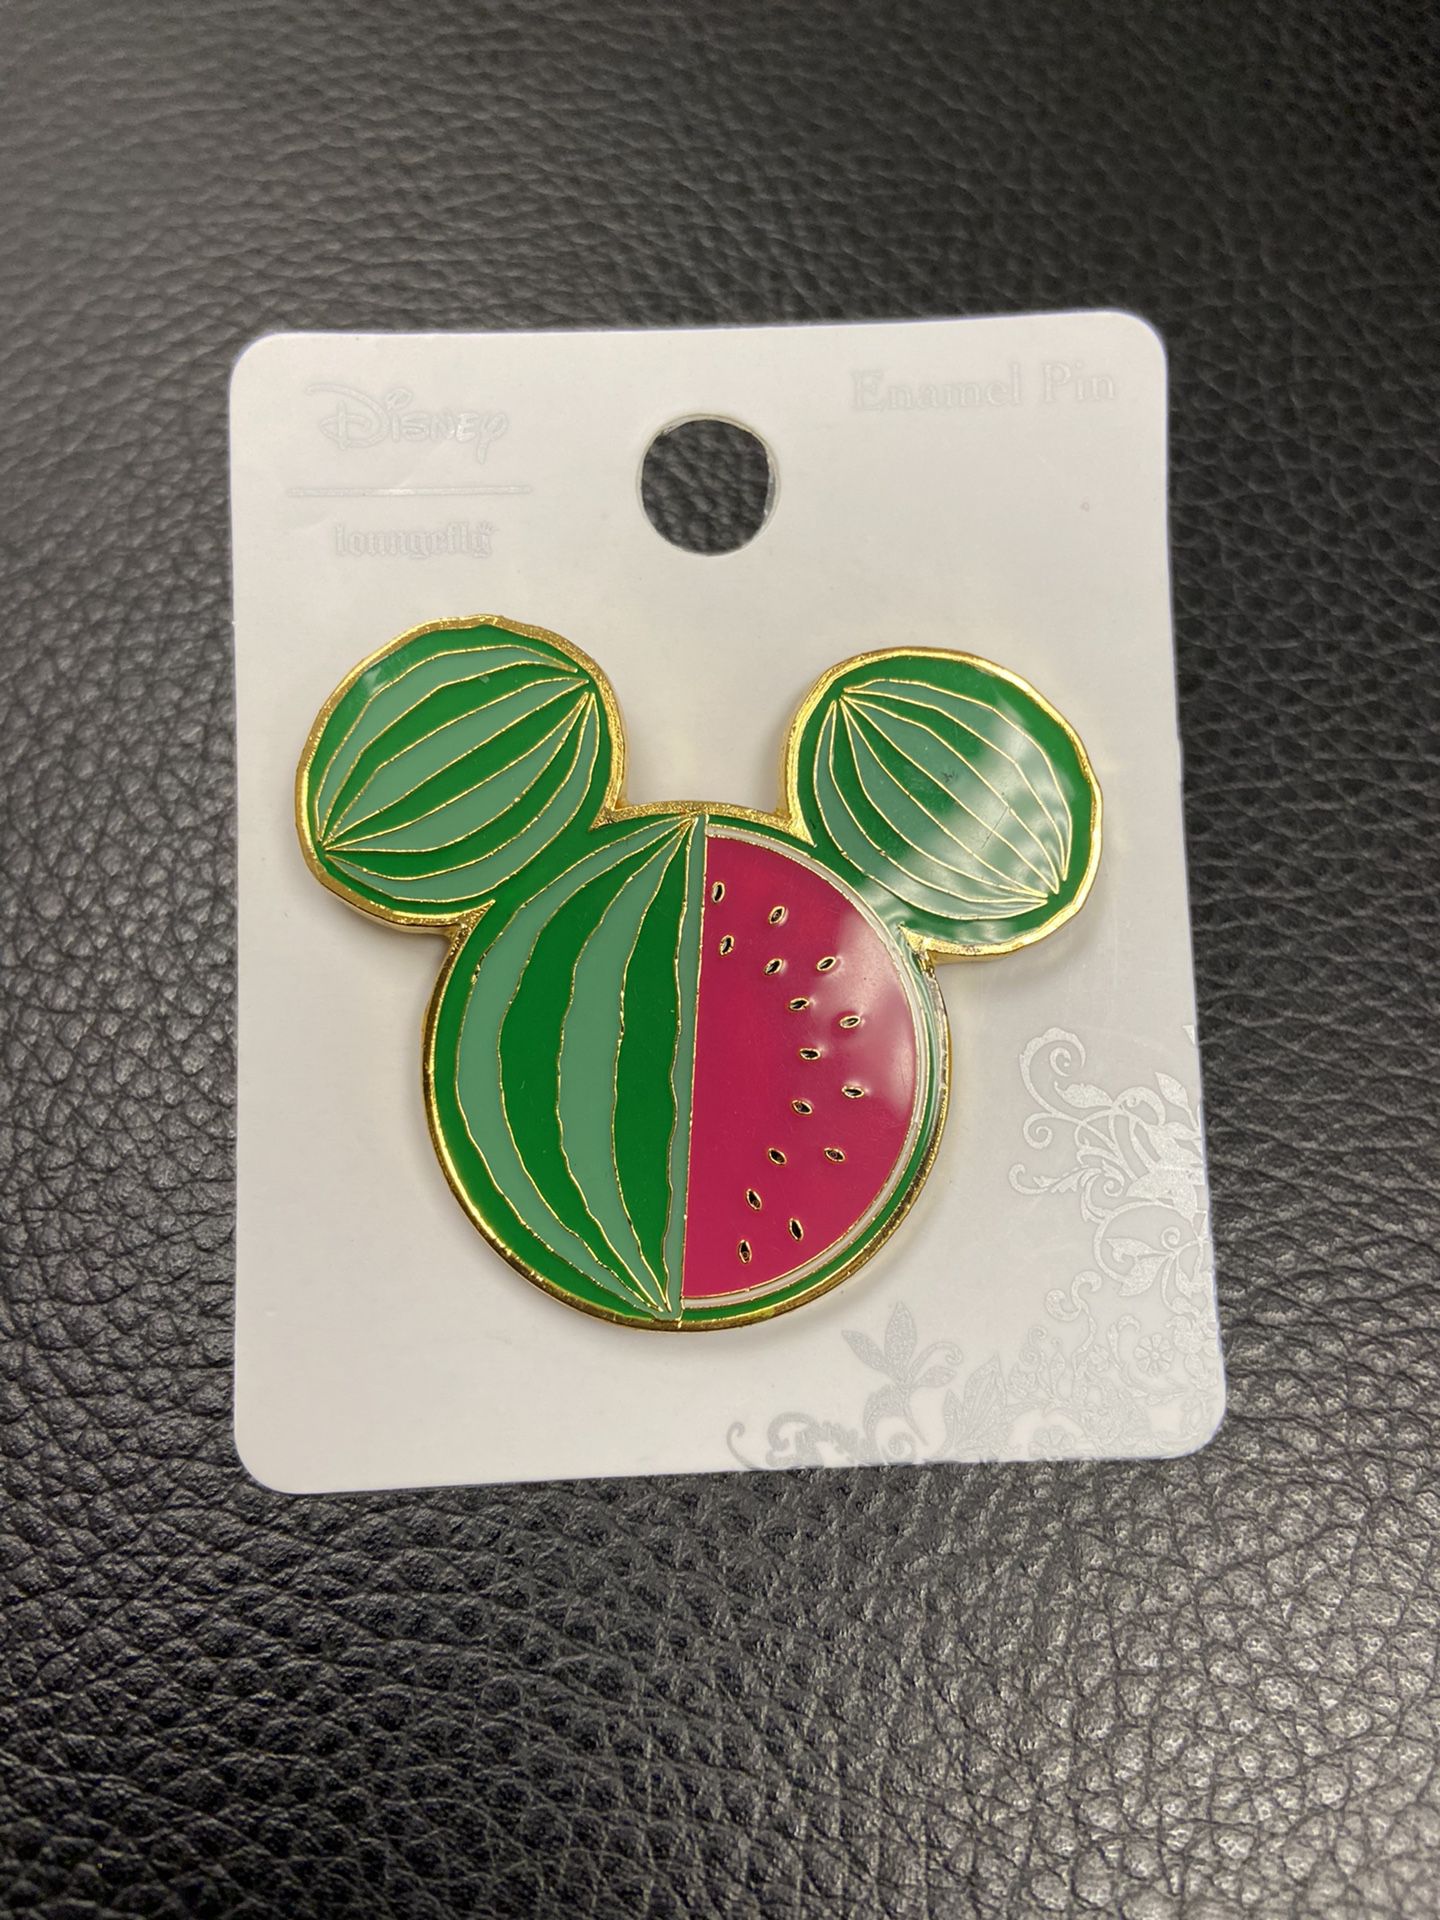 Watermelon Mickey Mouse Pin - Disney Pin - Loungefly